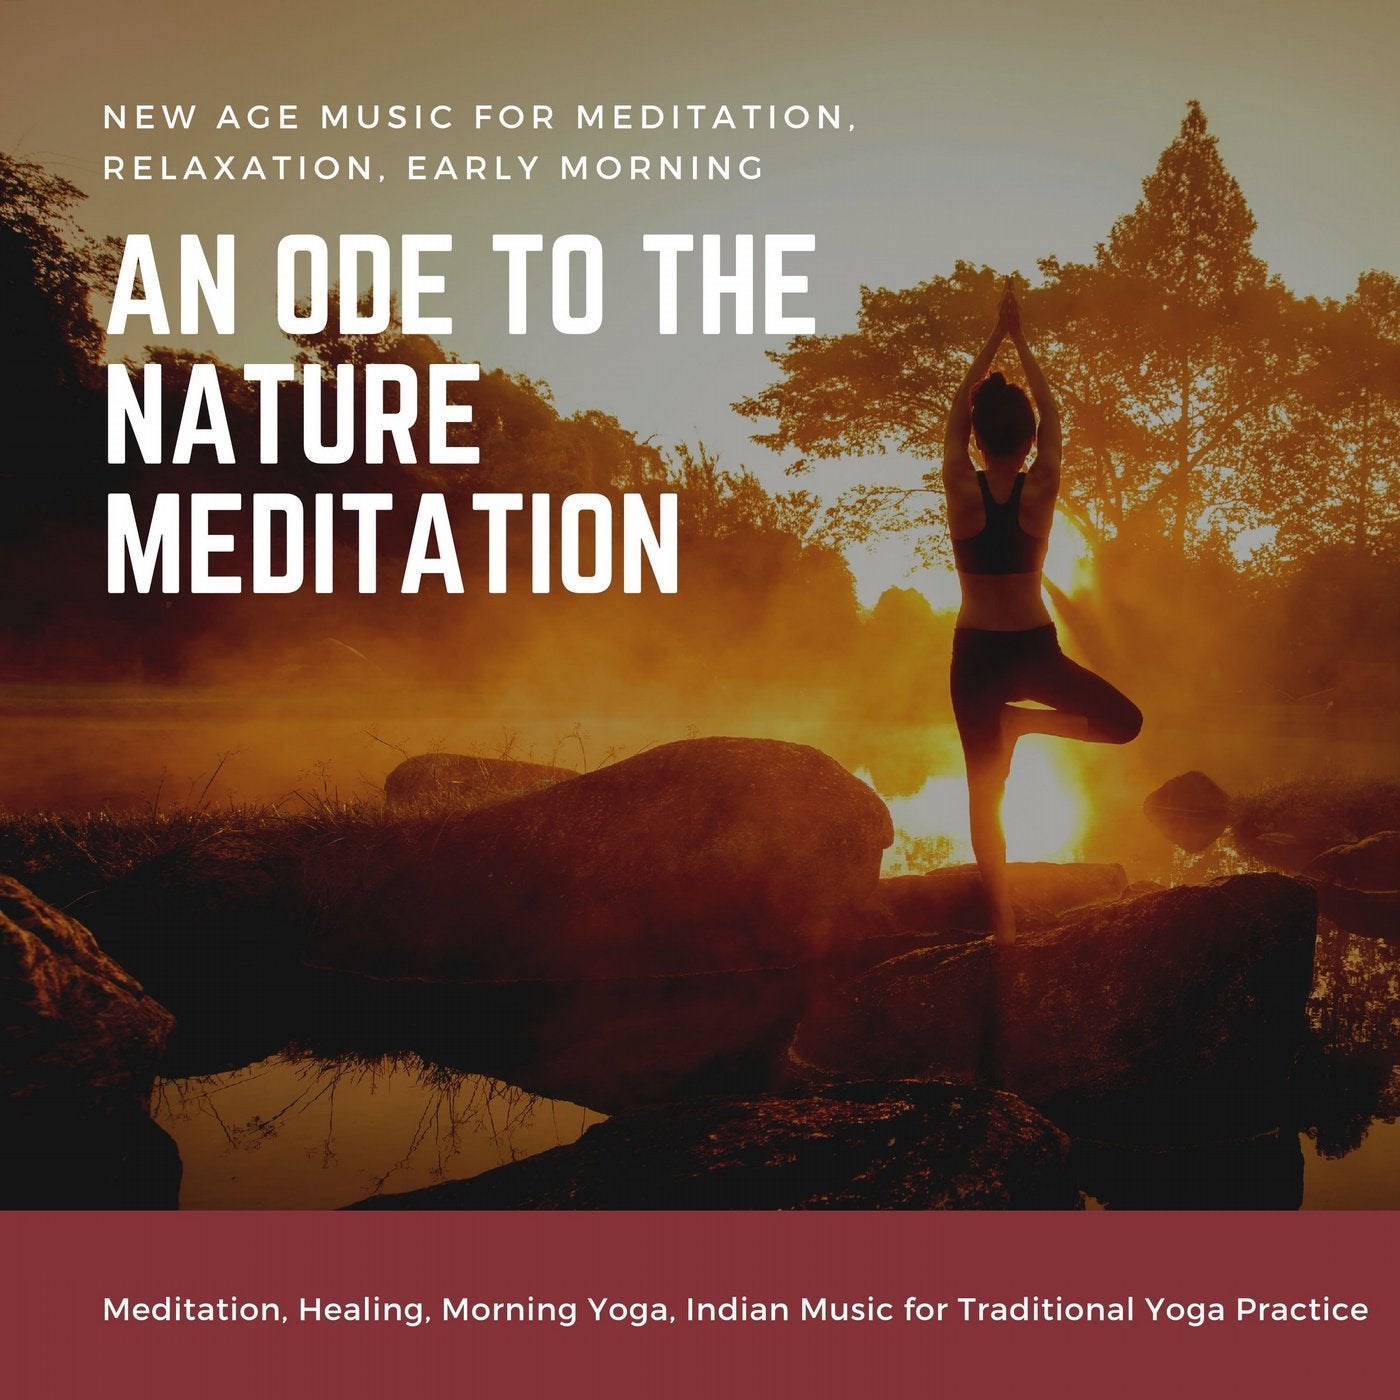 An Ode To The Nature Meditation (New Age Music For Meditation, Relaxation, Early Morning Meditation, Healing, Morning Yoga) (Indian Music For Traditional Yoga Practice)